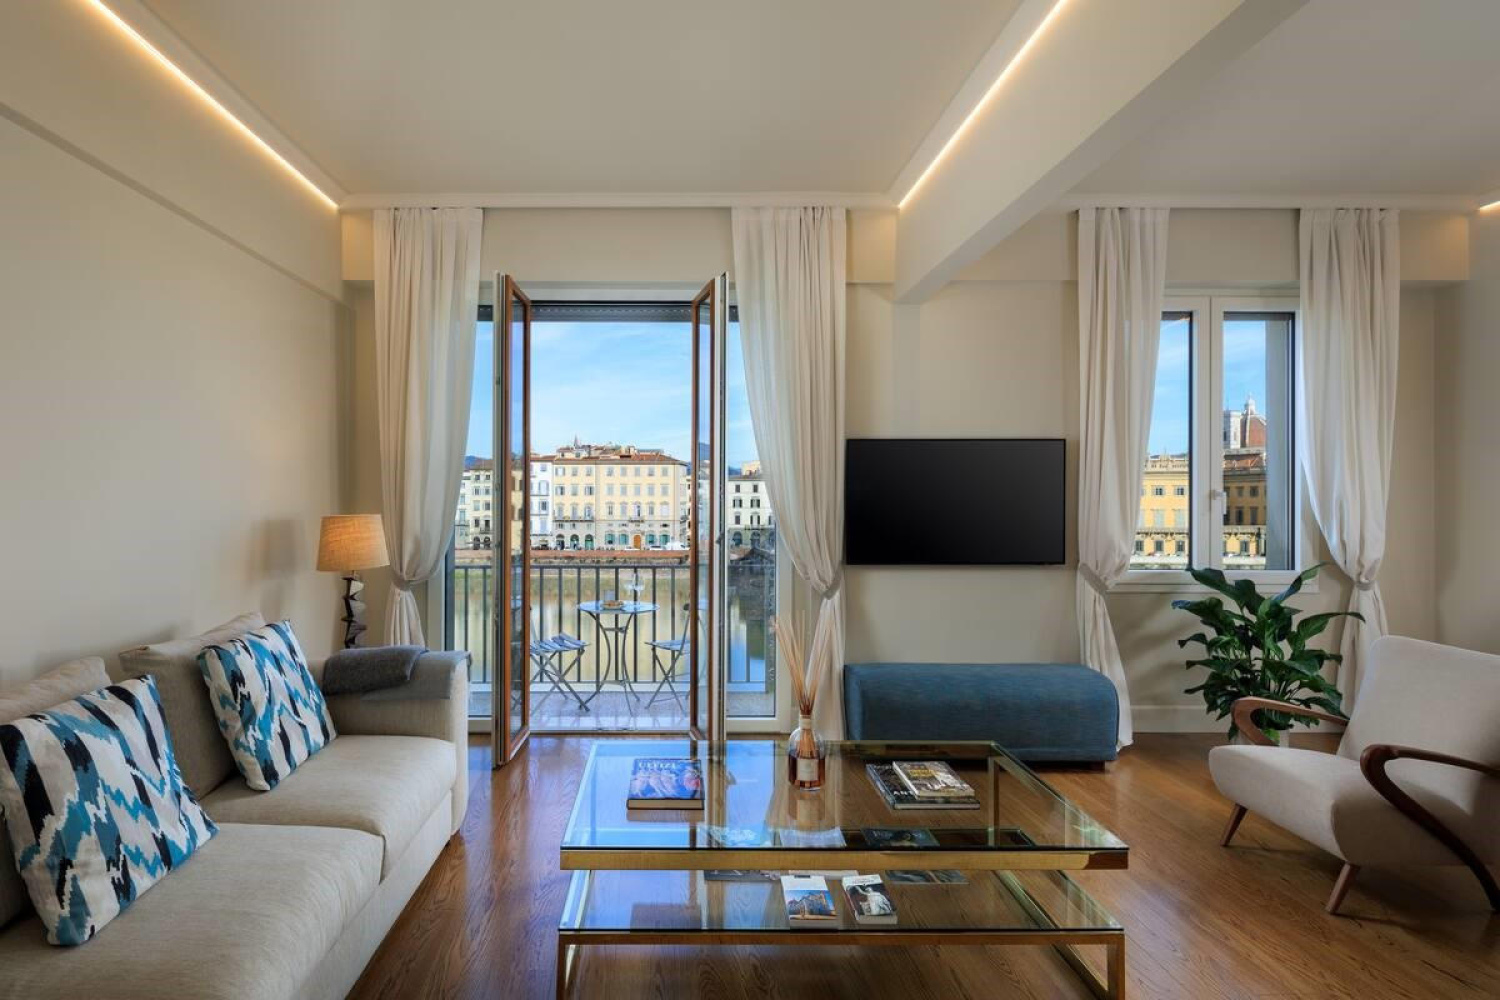 LUNGARNO SODERINI APARTMENT IN FLORENCE - IBFOR - Your design shop